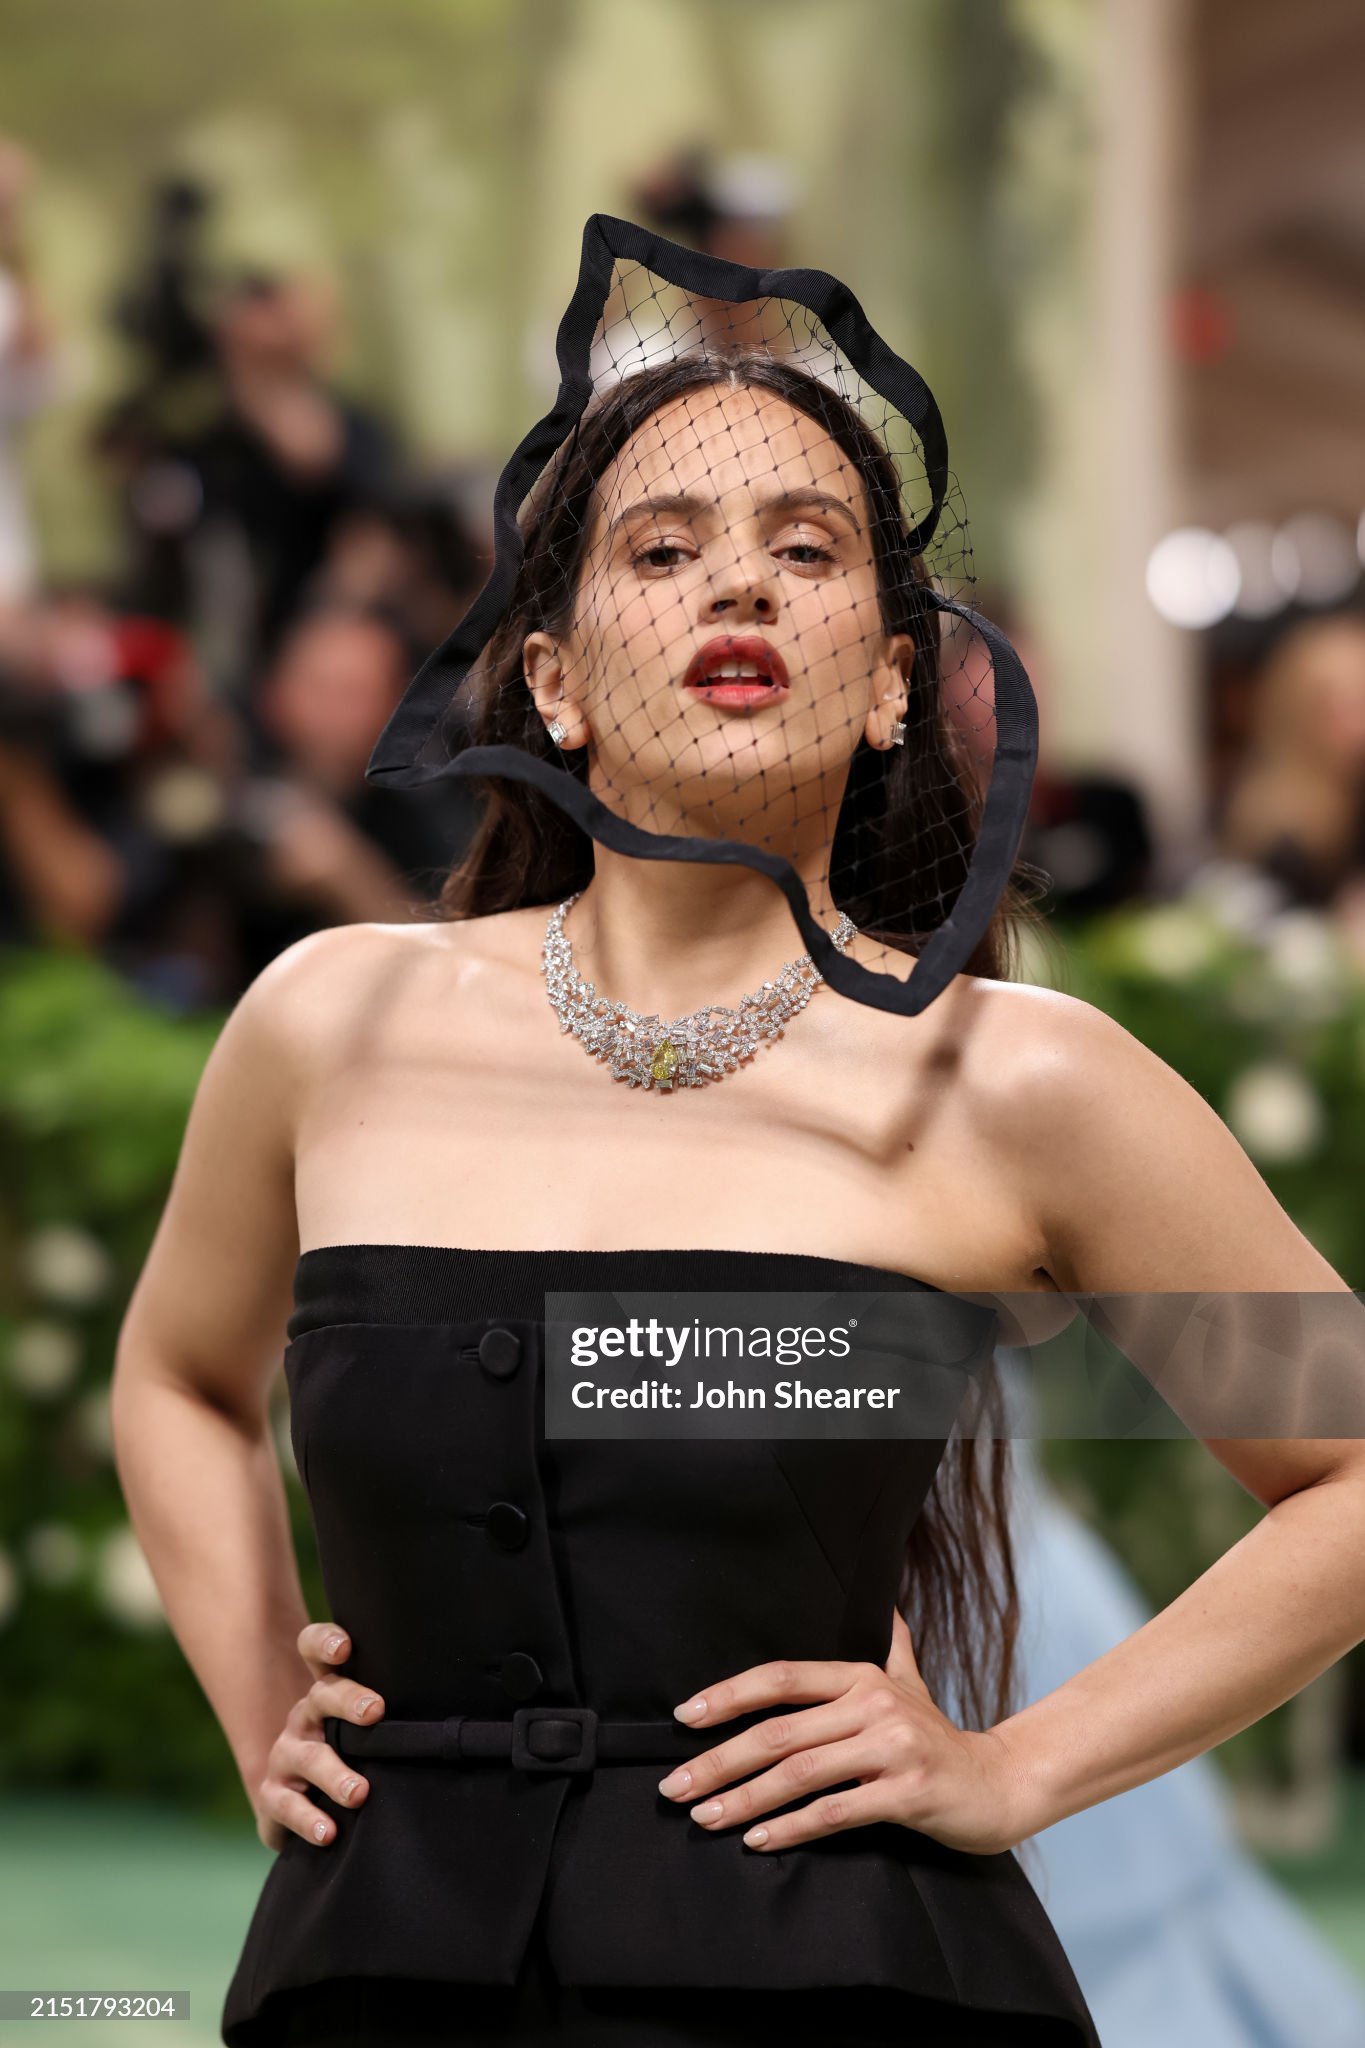 gettyimages-2151793204-2048x2048.jpg